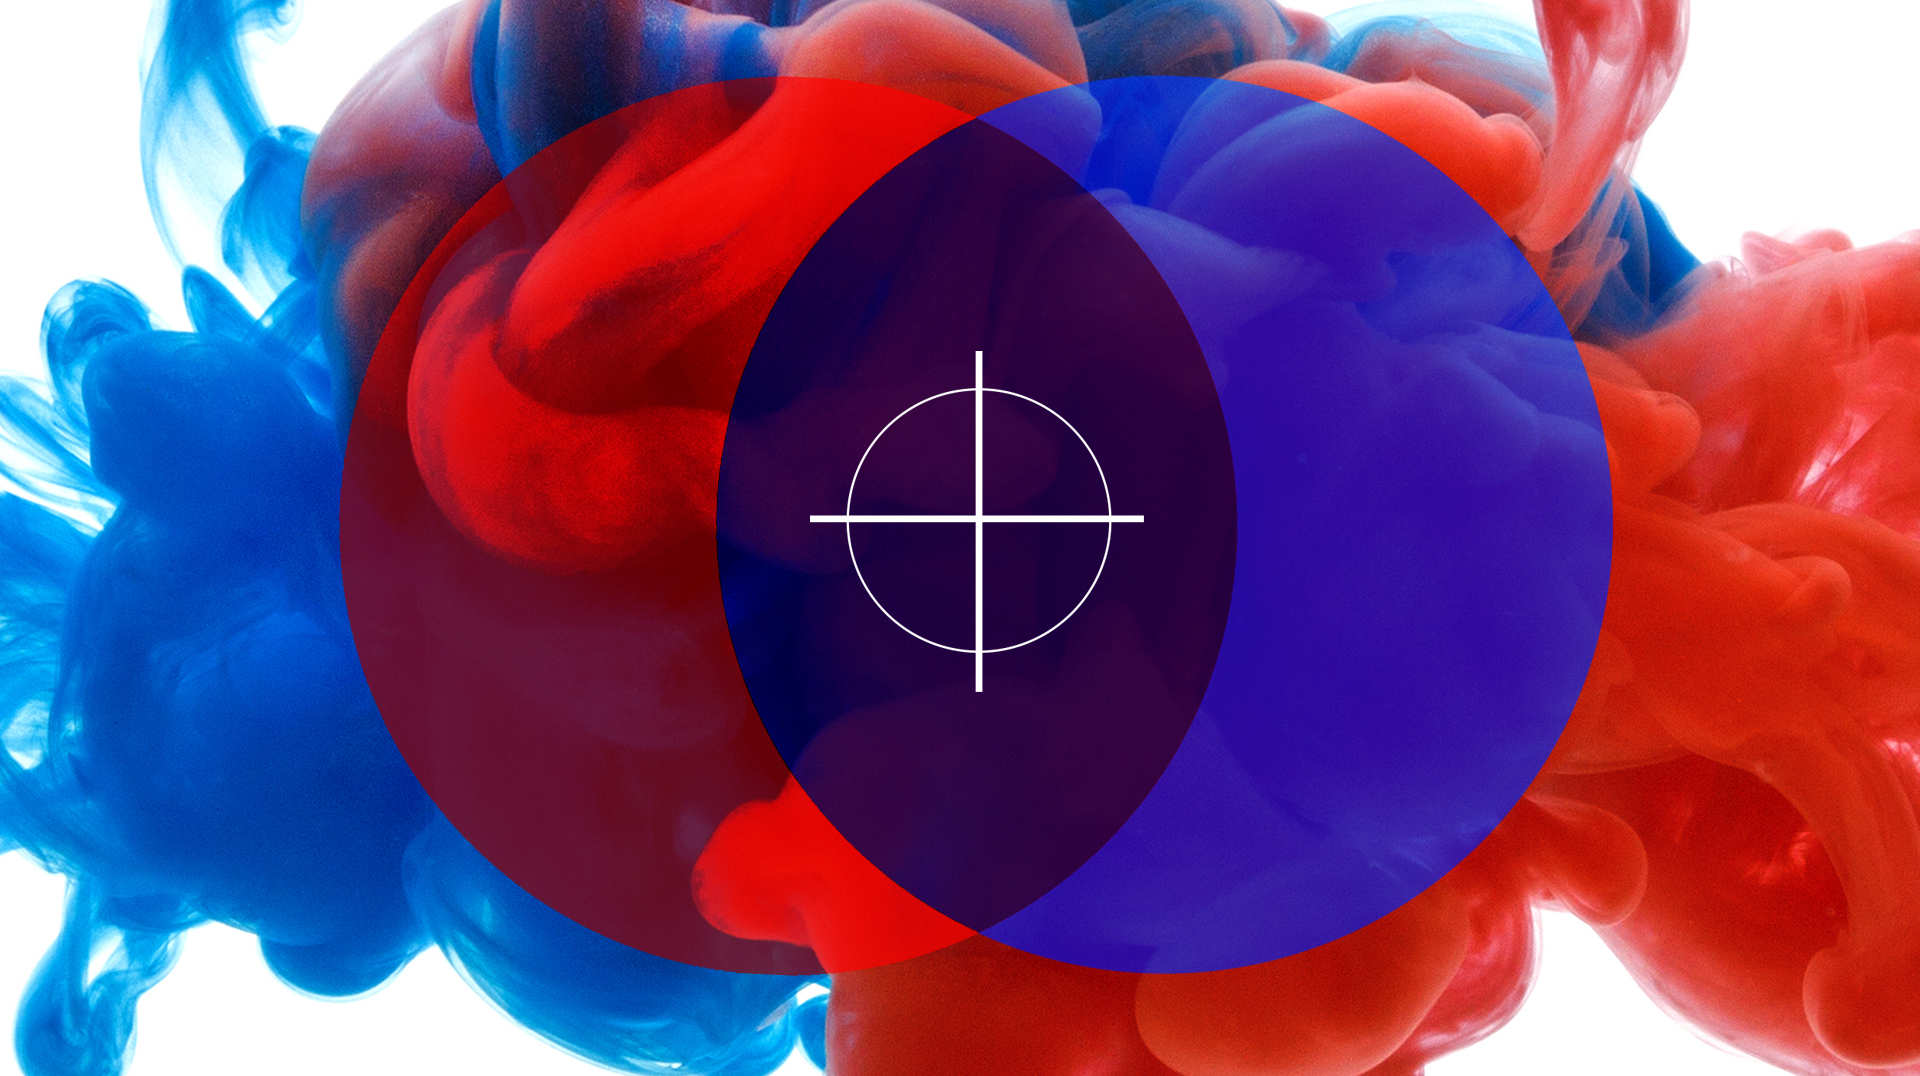 Symbol of rivalry and struggle or merging of a compound. Ink in water red and blue isolated on white